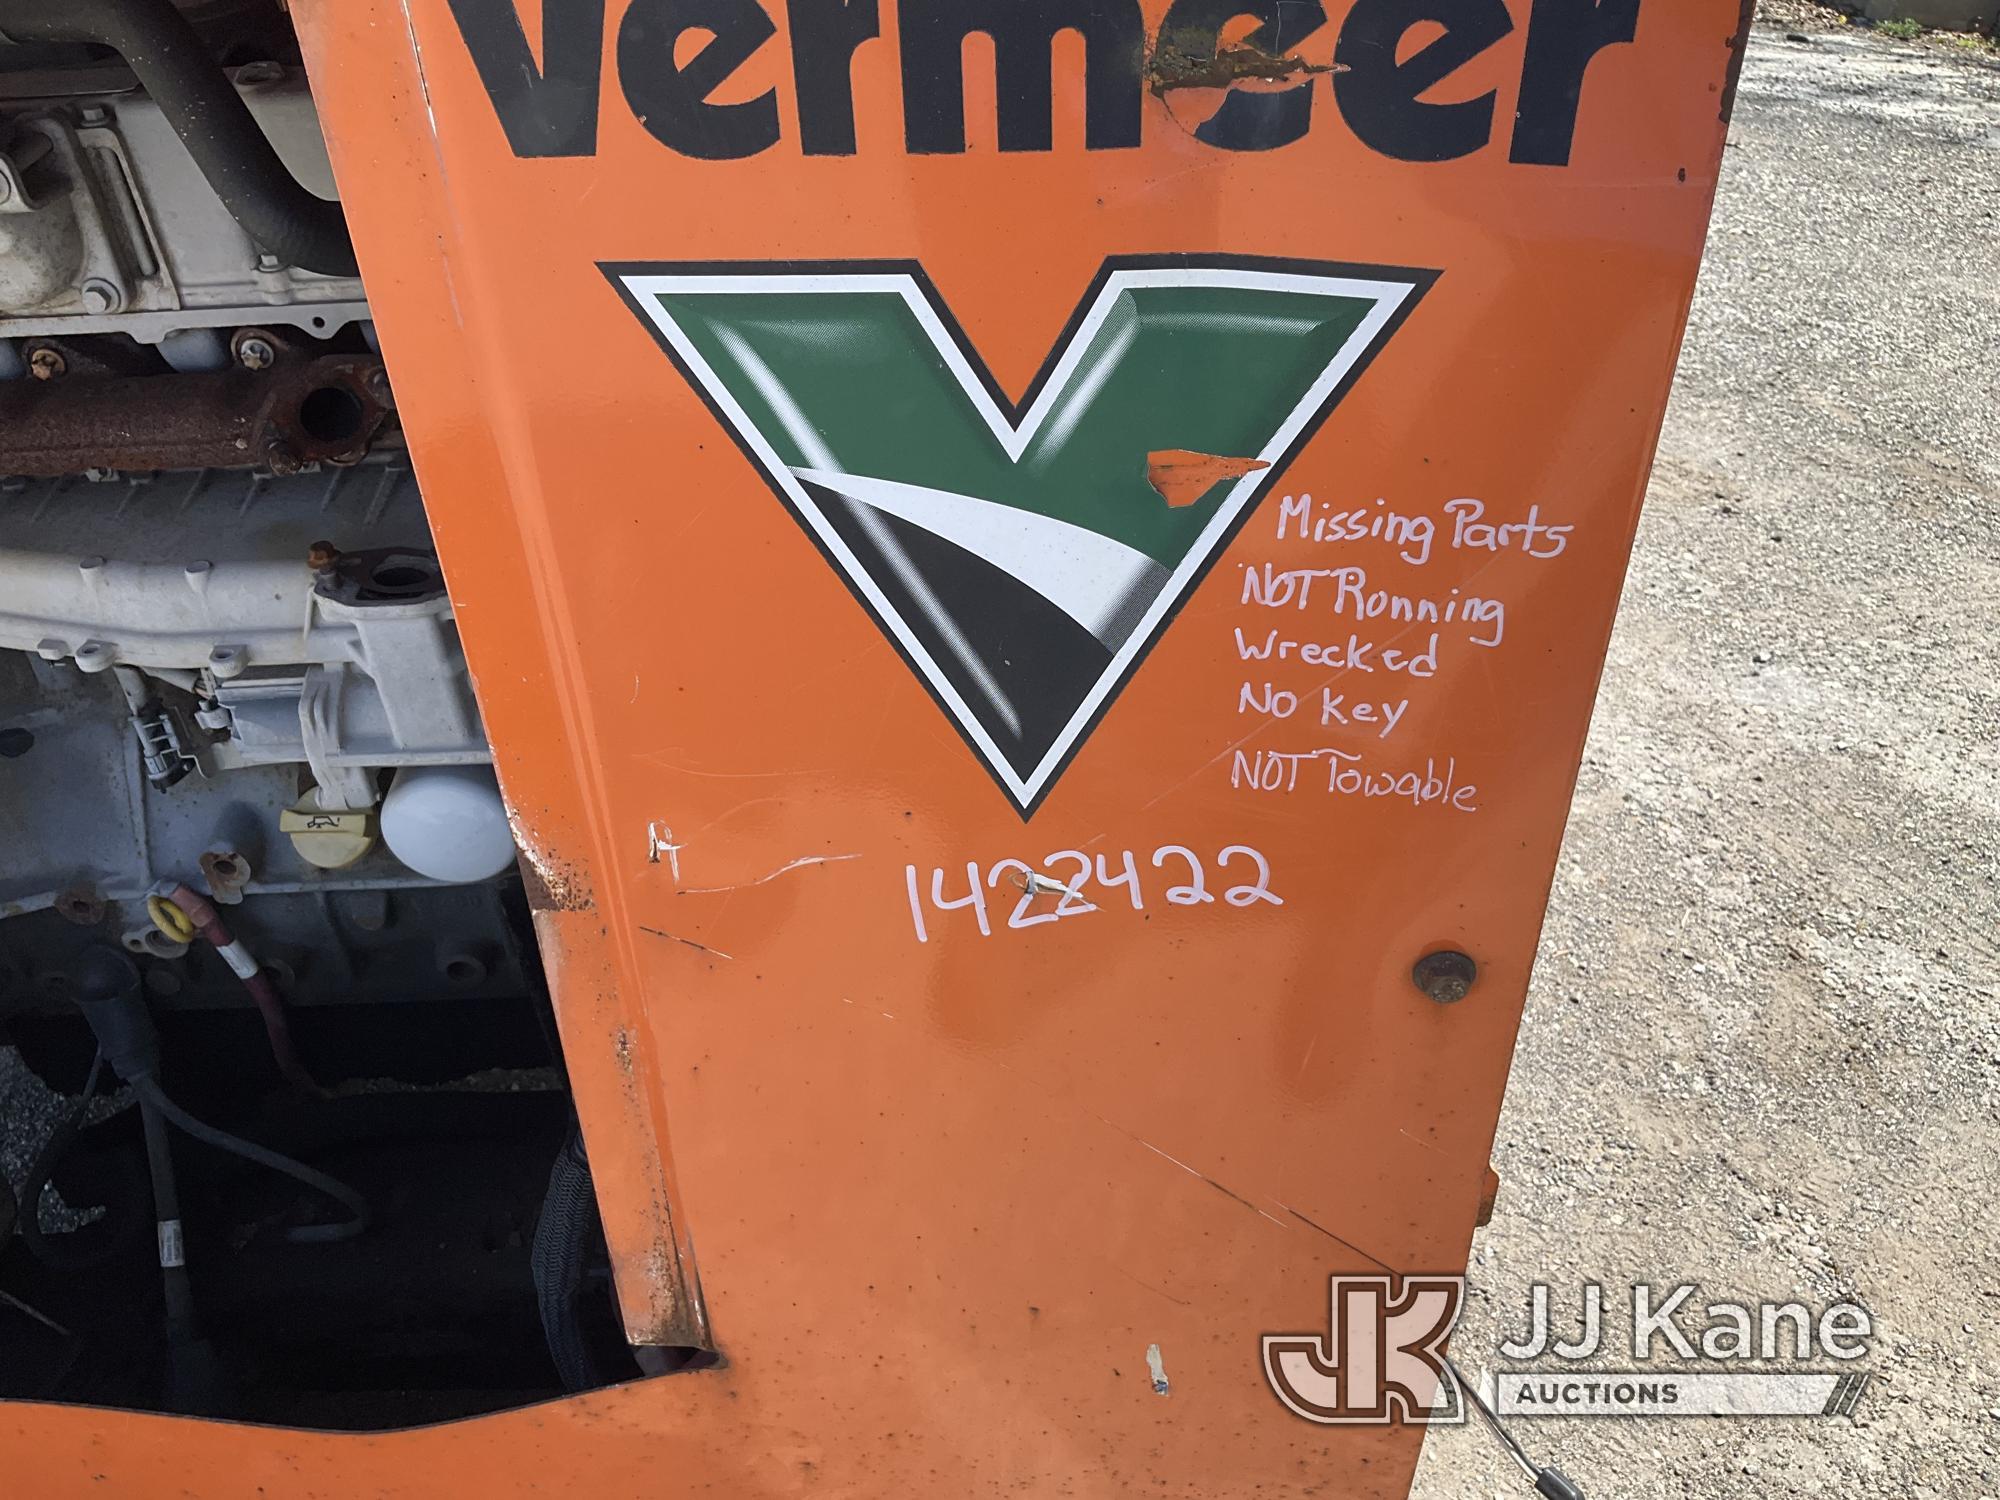 (Plymouth Meeting, PA) 2016 Vermeer BC1000XL Chipper (12in Drum), Trailer Mtd. Wrecked/Totaled: Was